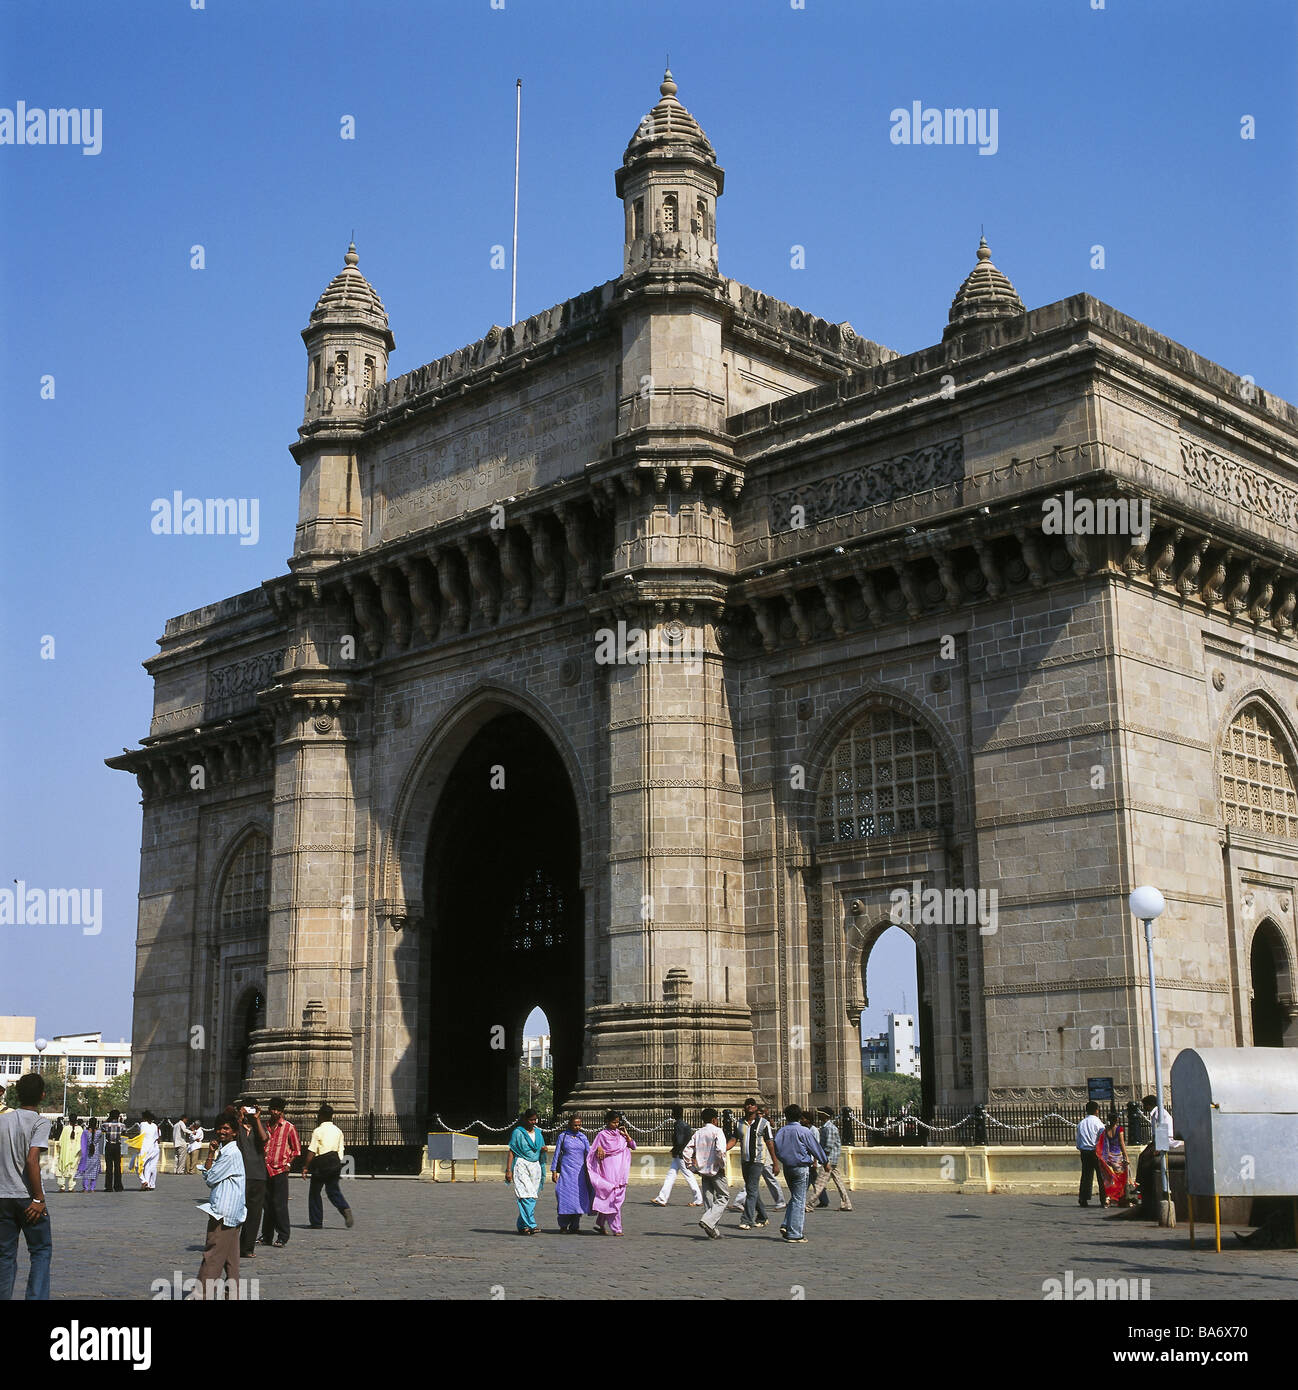 India Bombay Gateway of India 1911 passers-by no models release Asia 26 m high gate-construction gate-buildings construction Stock Photo